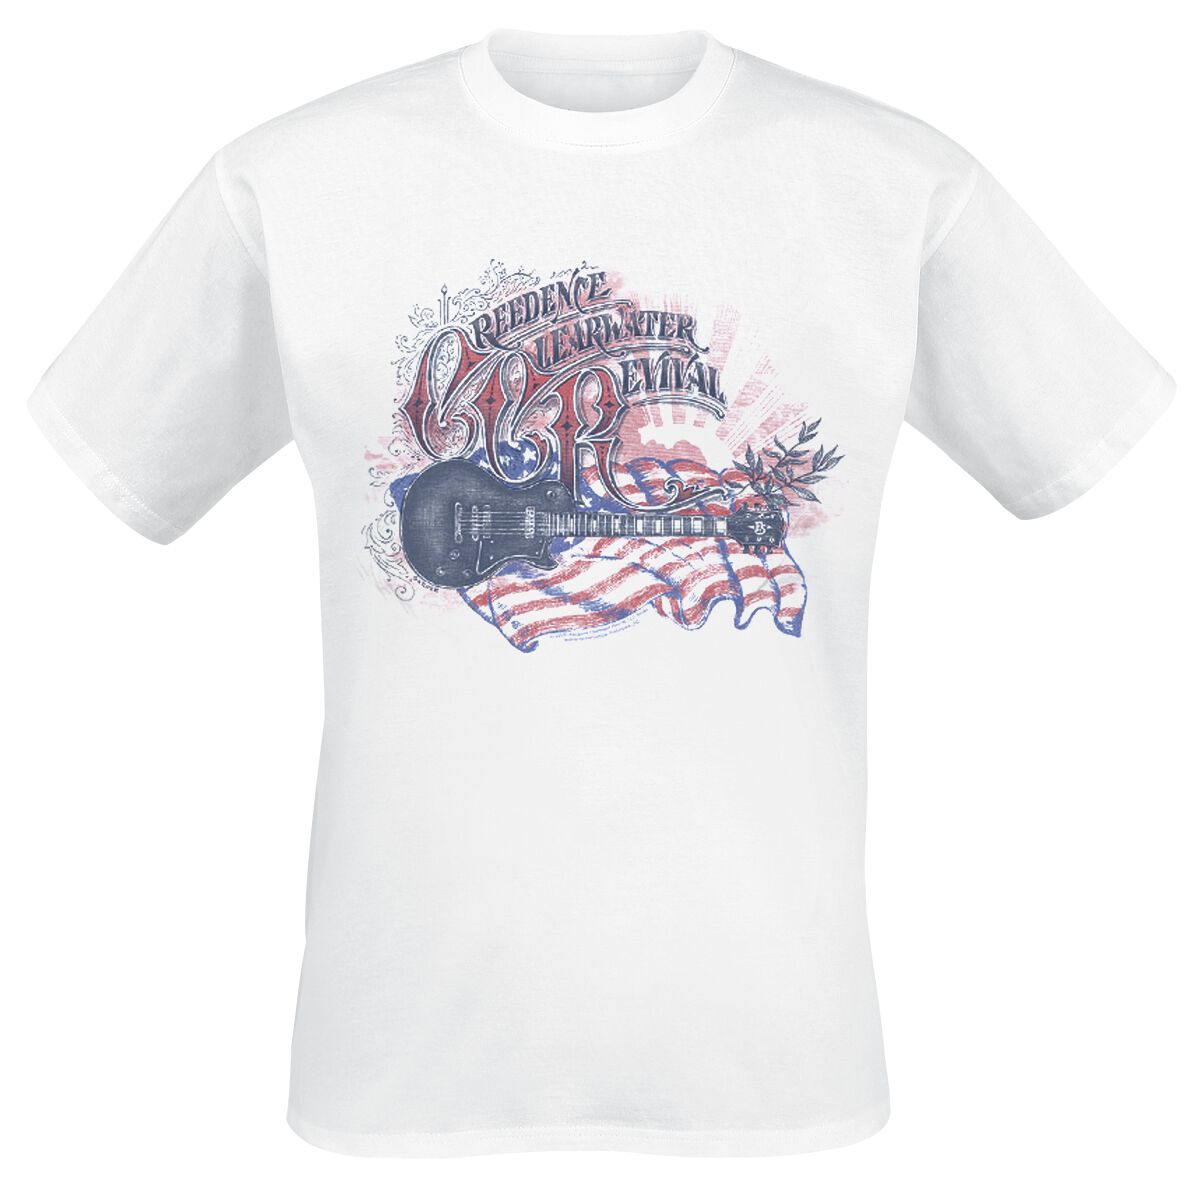 Creedence Clearwater Revival (CCR) Flag T-Shirt white